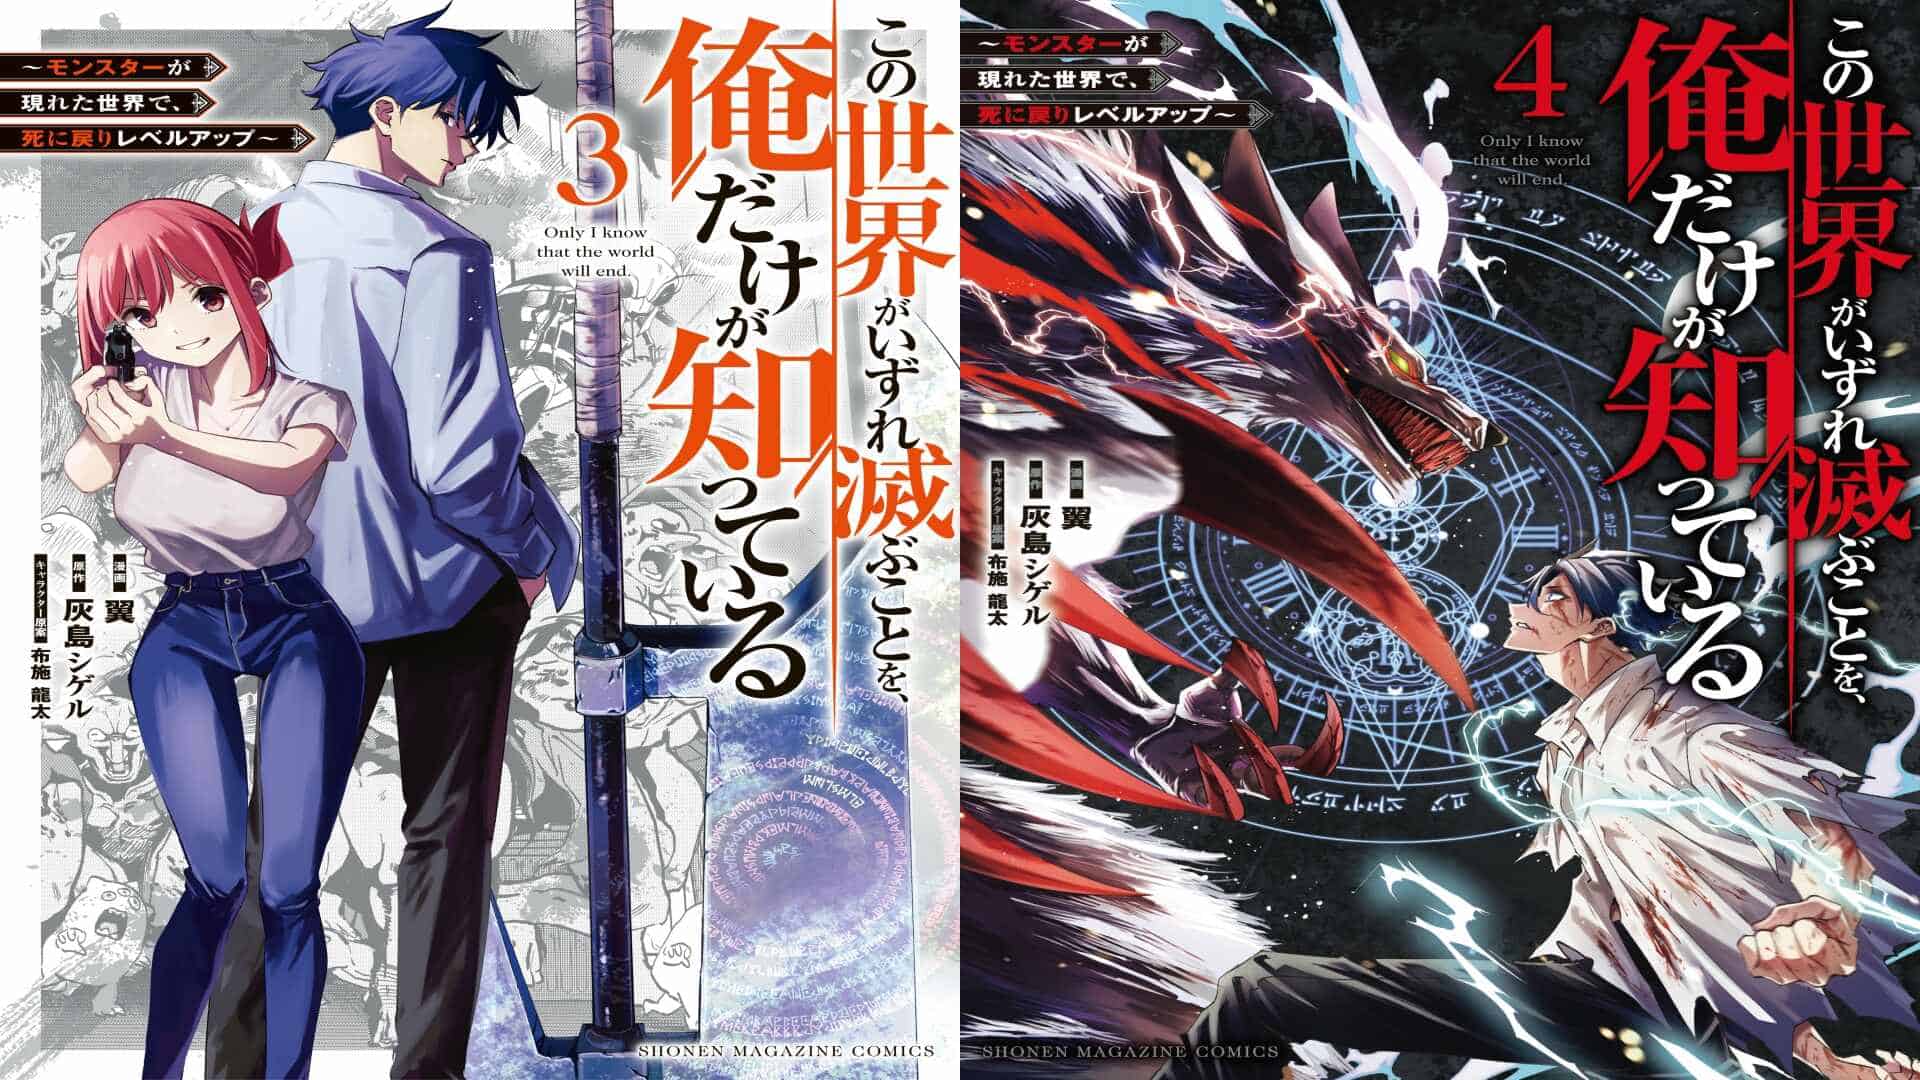 Only I Know That The World Will End Manga Cover Pages Volumes 3 & 4